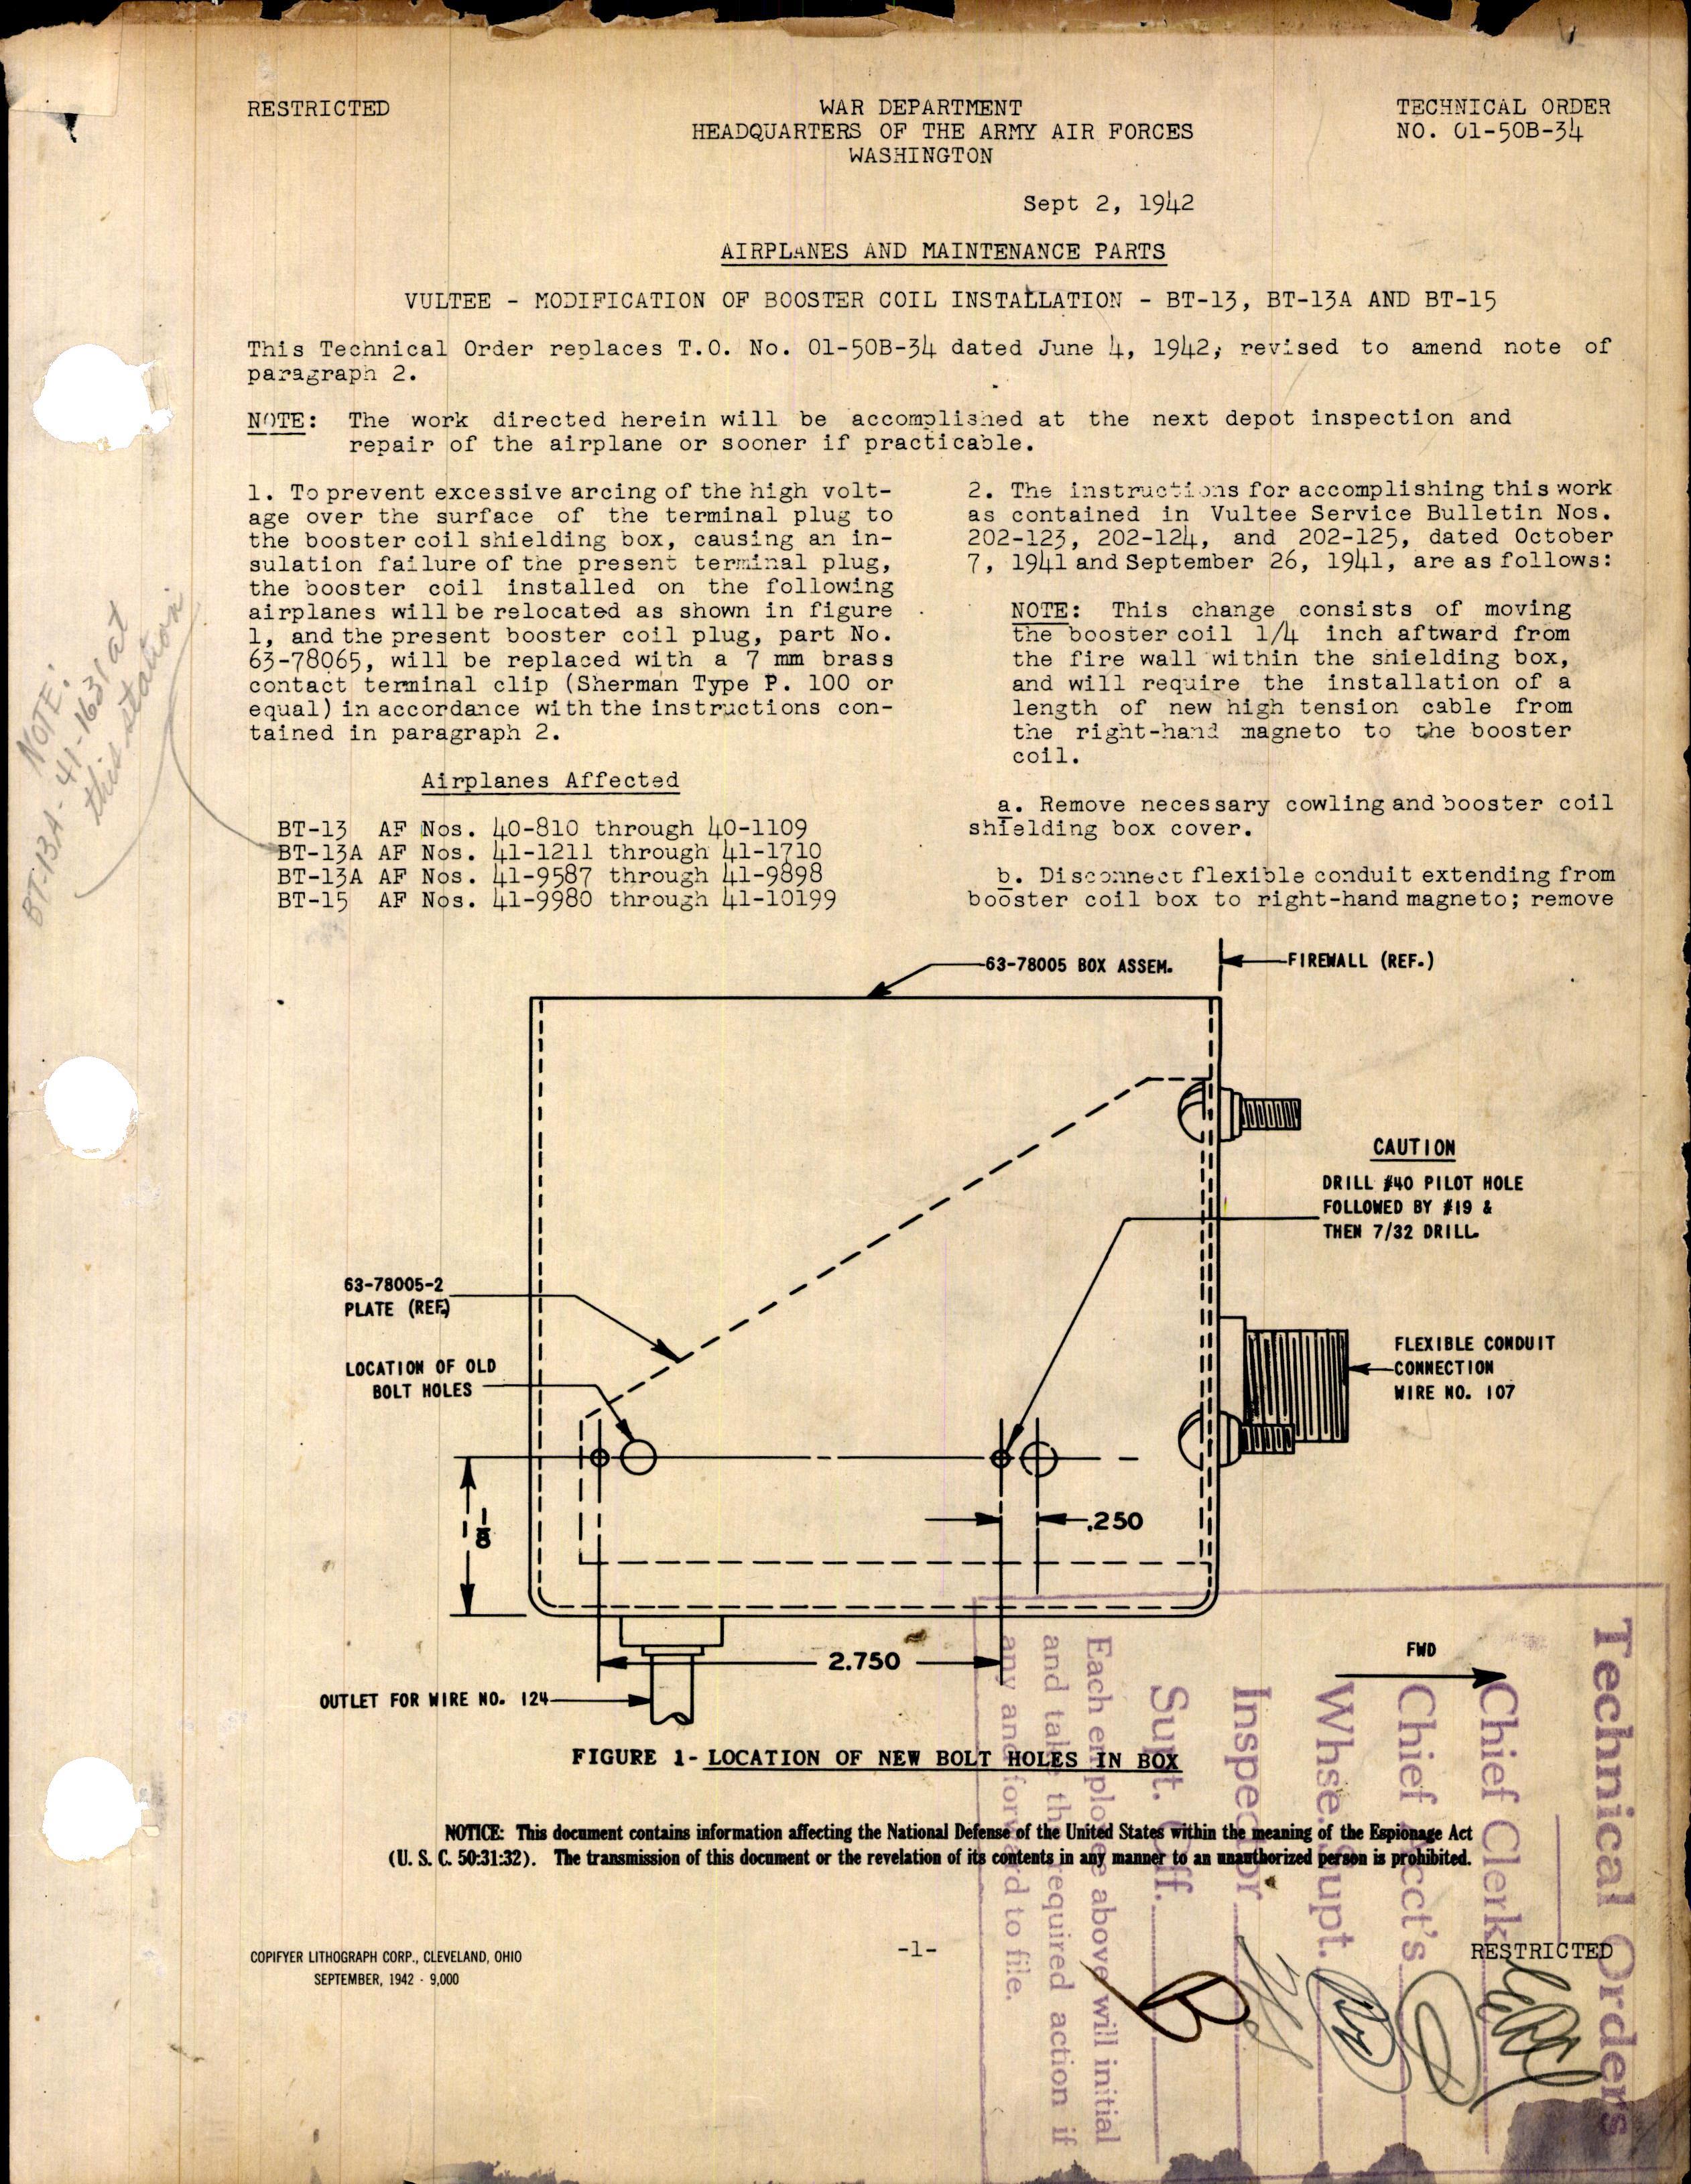 Sample page 1 from AirCorps Library document: Modification of Booster Coil Installation - BT-13, BT-13A, and BT-15